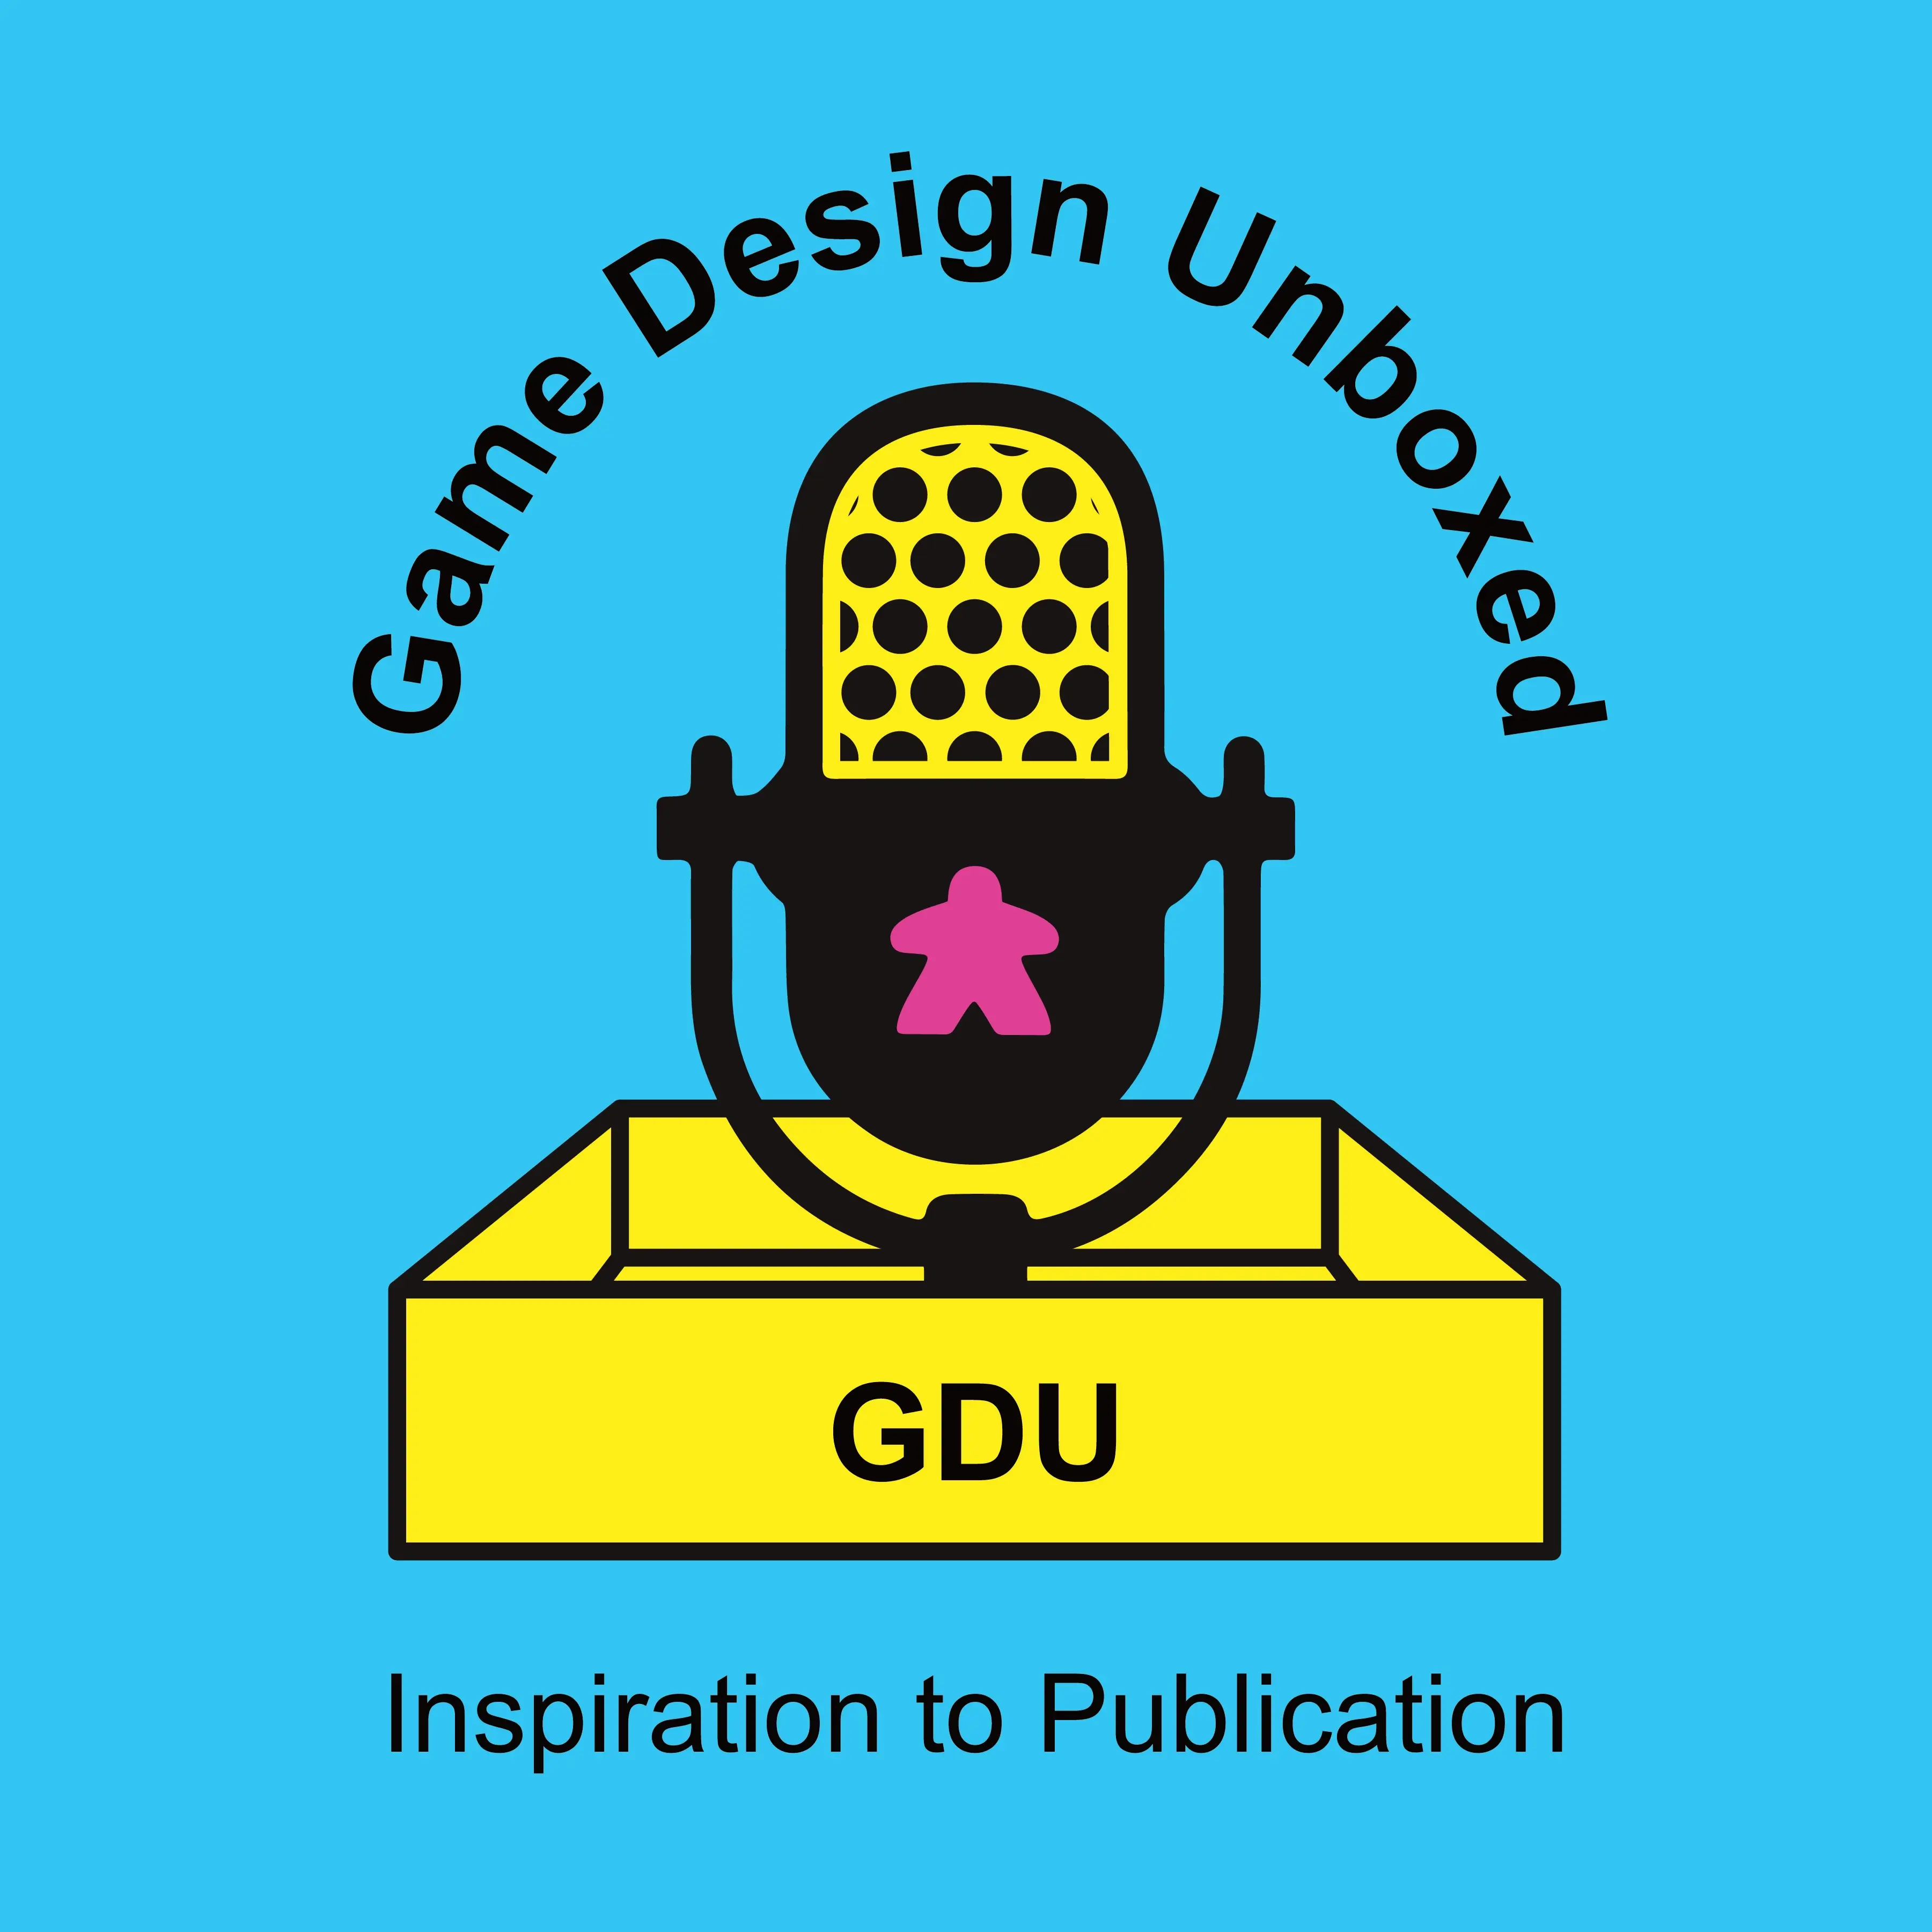 The Game Design Unboxed podcast hosted by Danielle is rapidly approaching 100 episodes